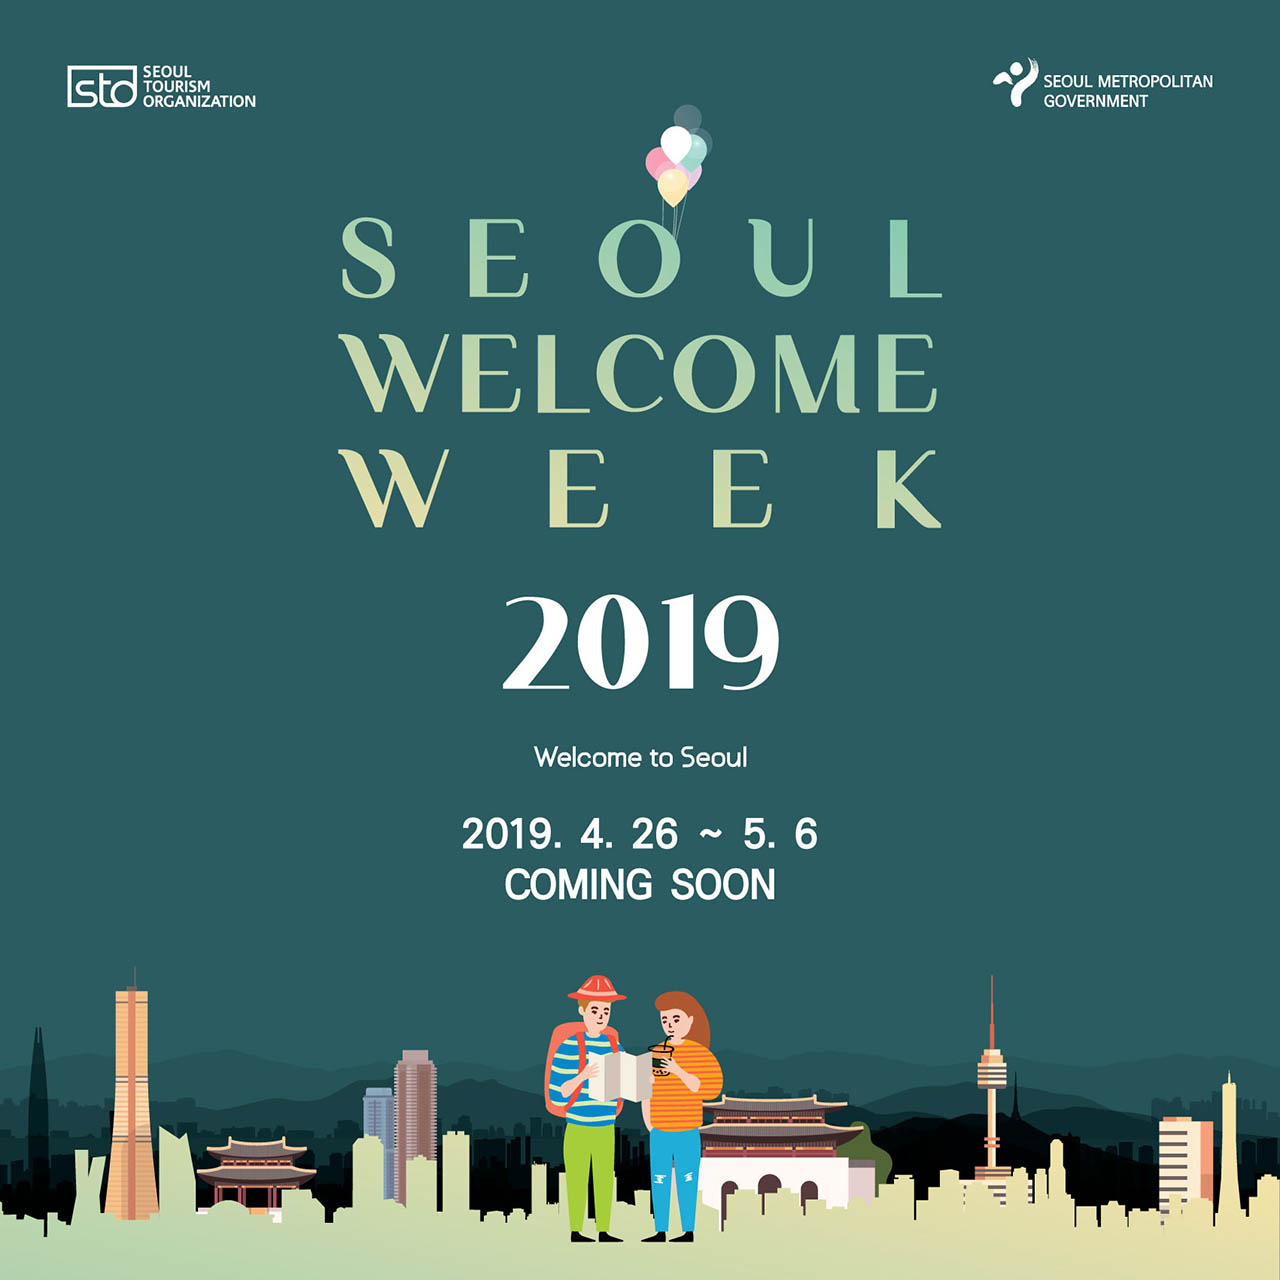 Seoul Hosts “2019 Tourist Welcome Week” for Foreign Tourists